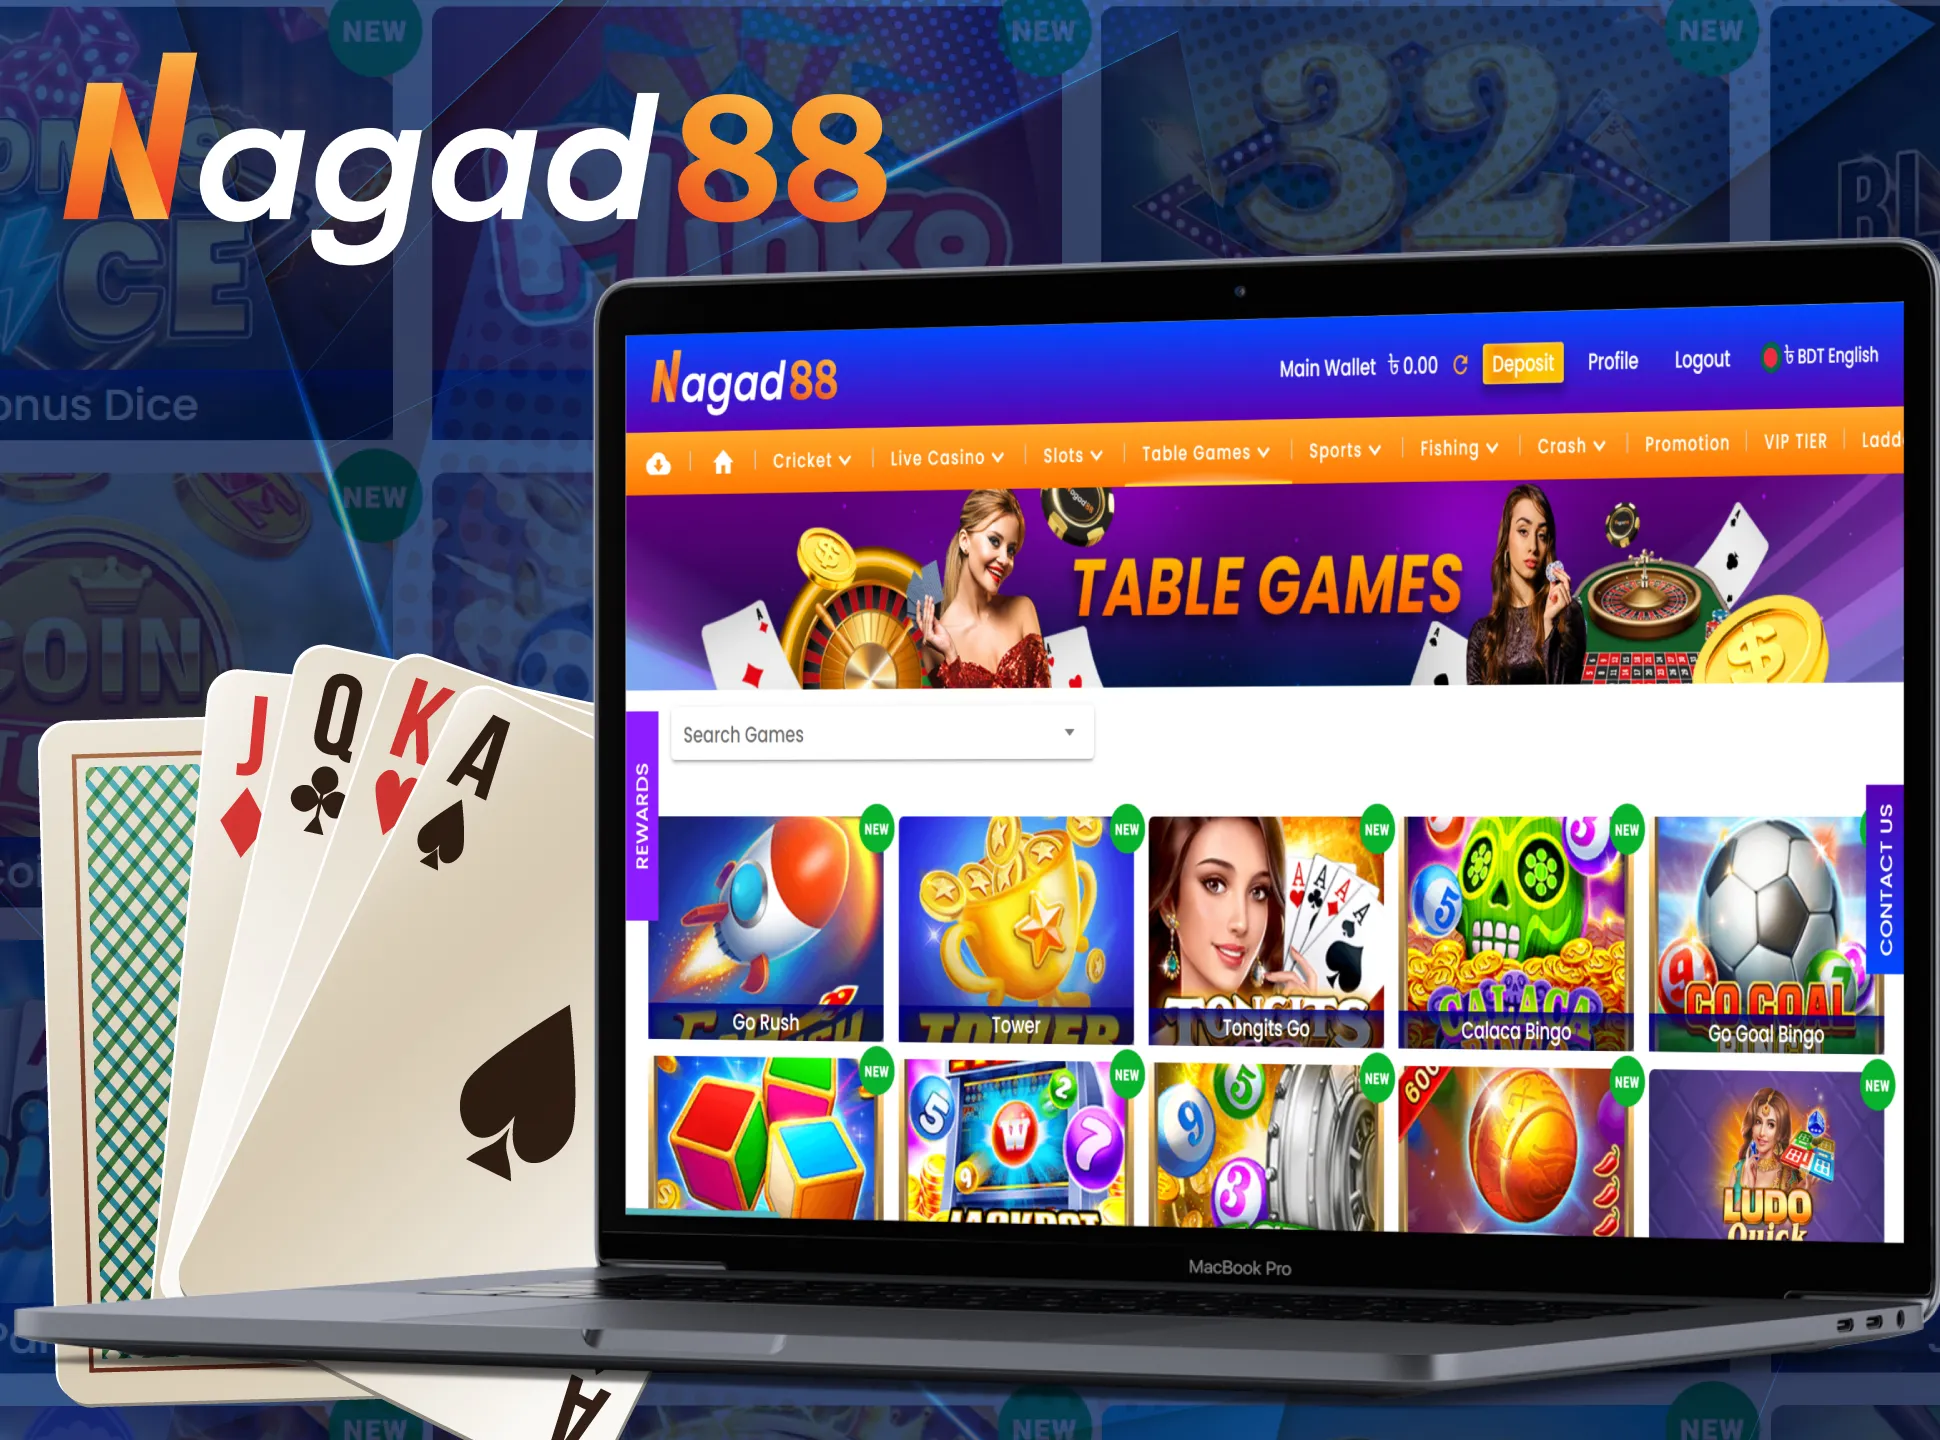 Try playing table games at Nagad88 Casino.